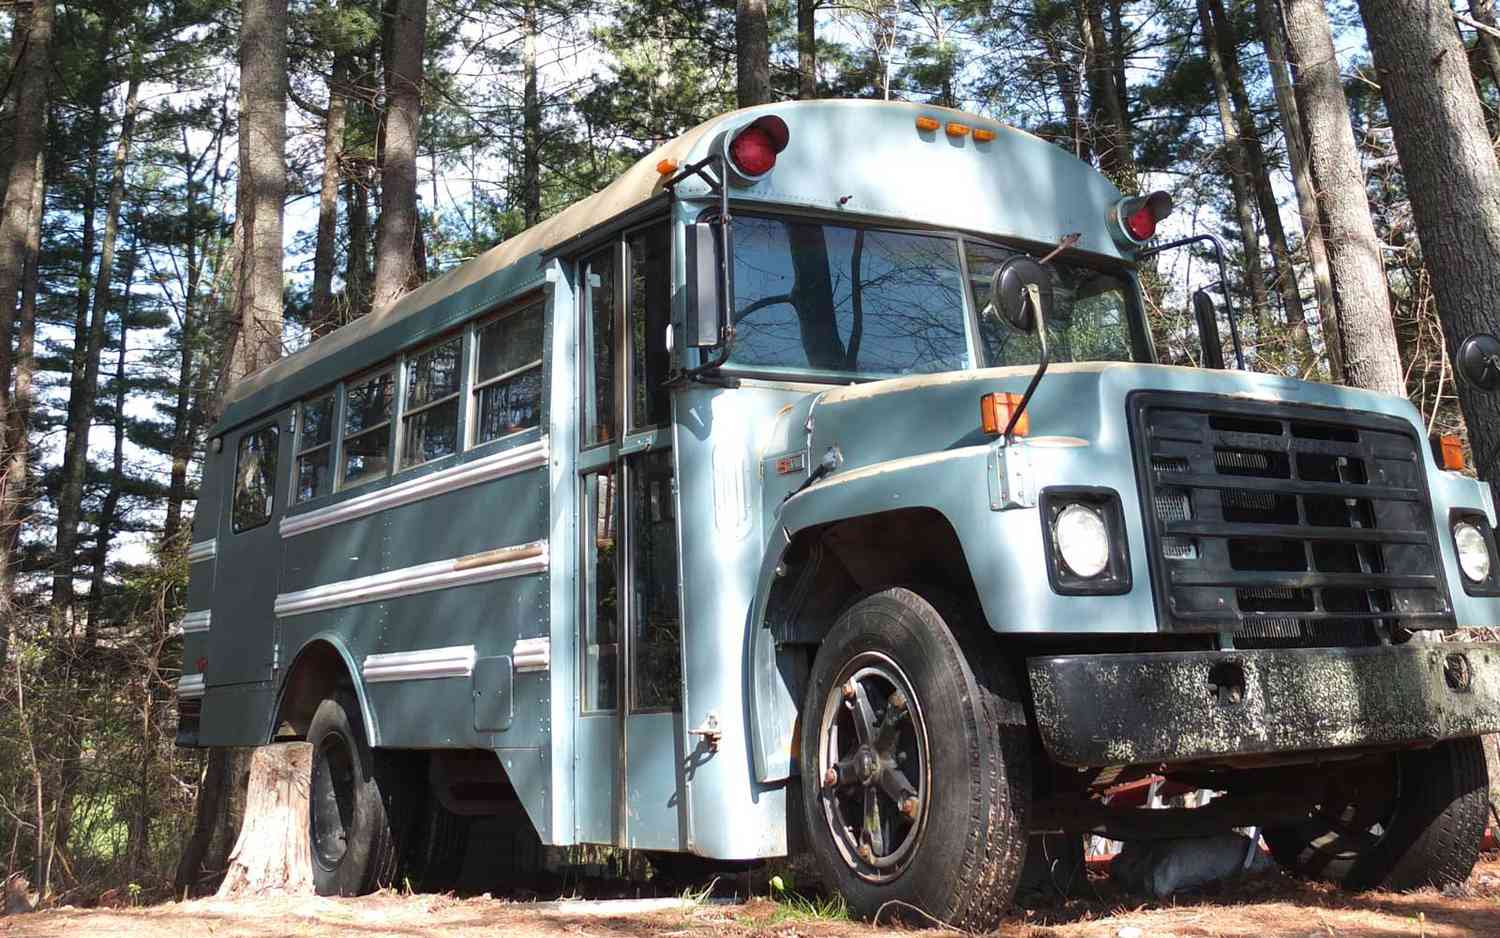 This School Bus in the Woods Is Actually an Adorable Airbnb